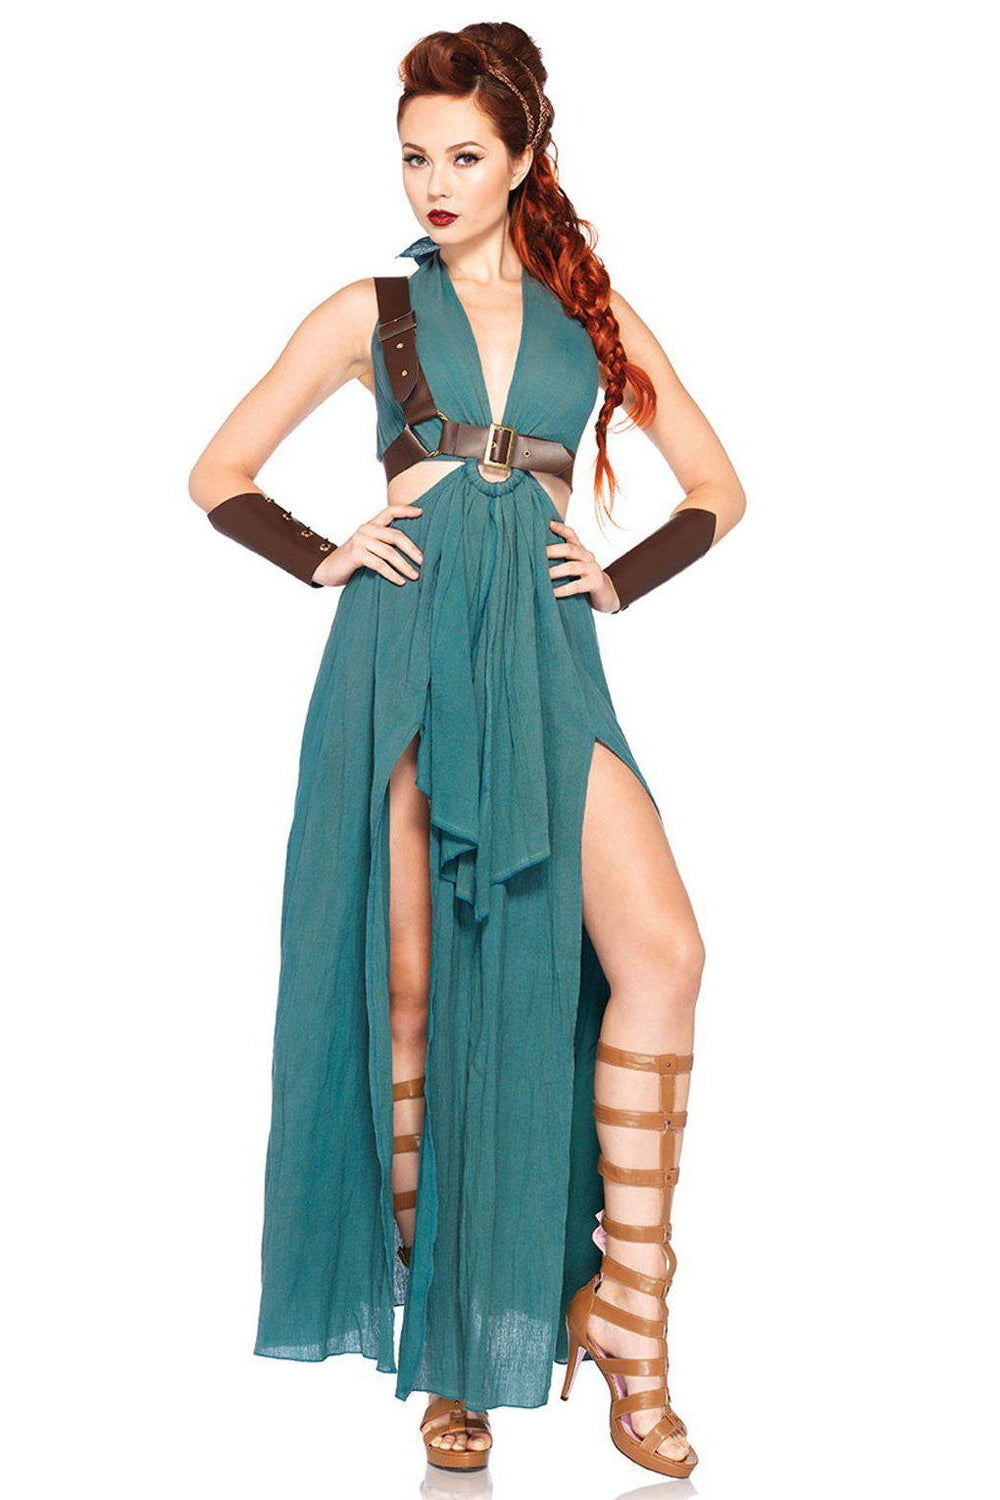 Warrior Maiden Costume-Other Costumes-Leg Avenue-SEXYSHOES.COM